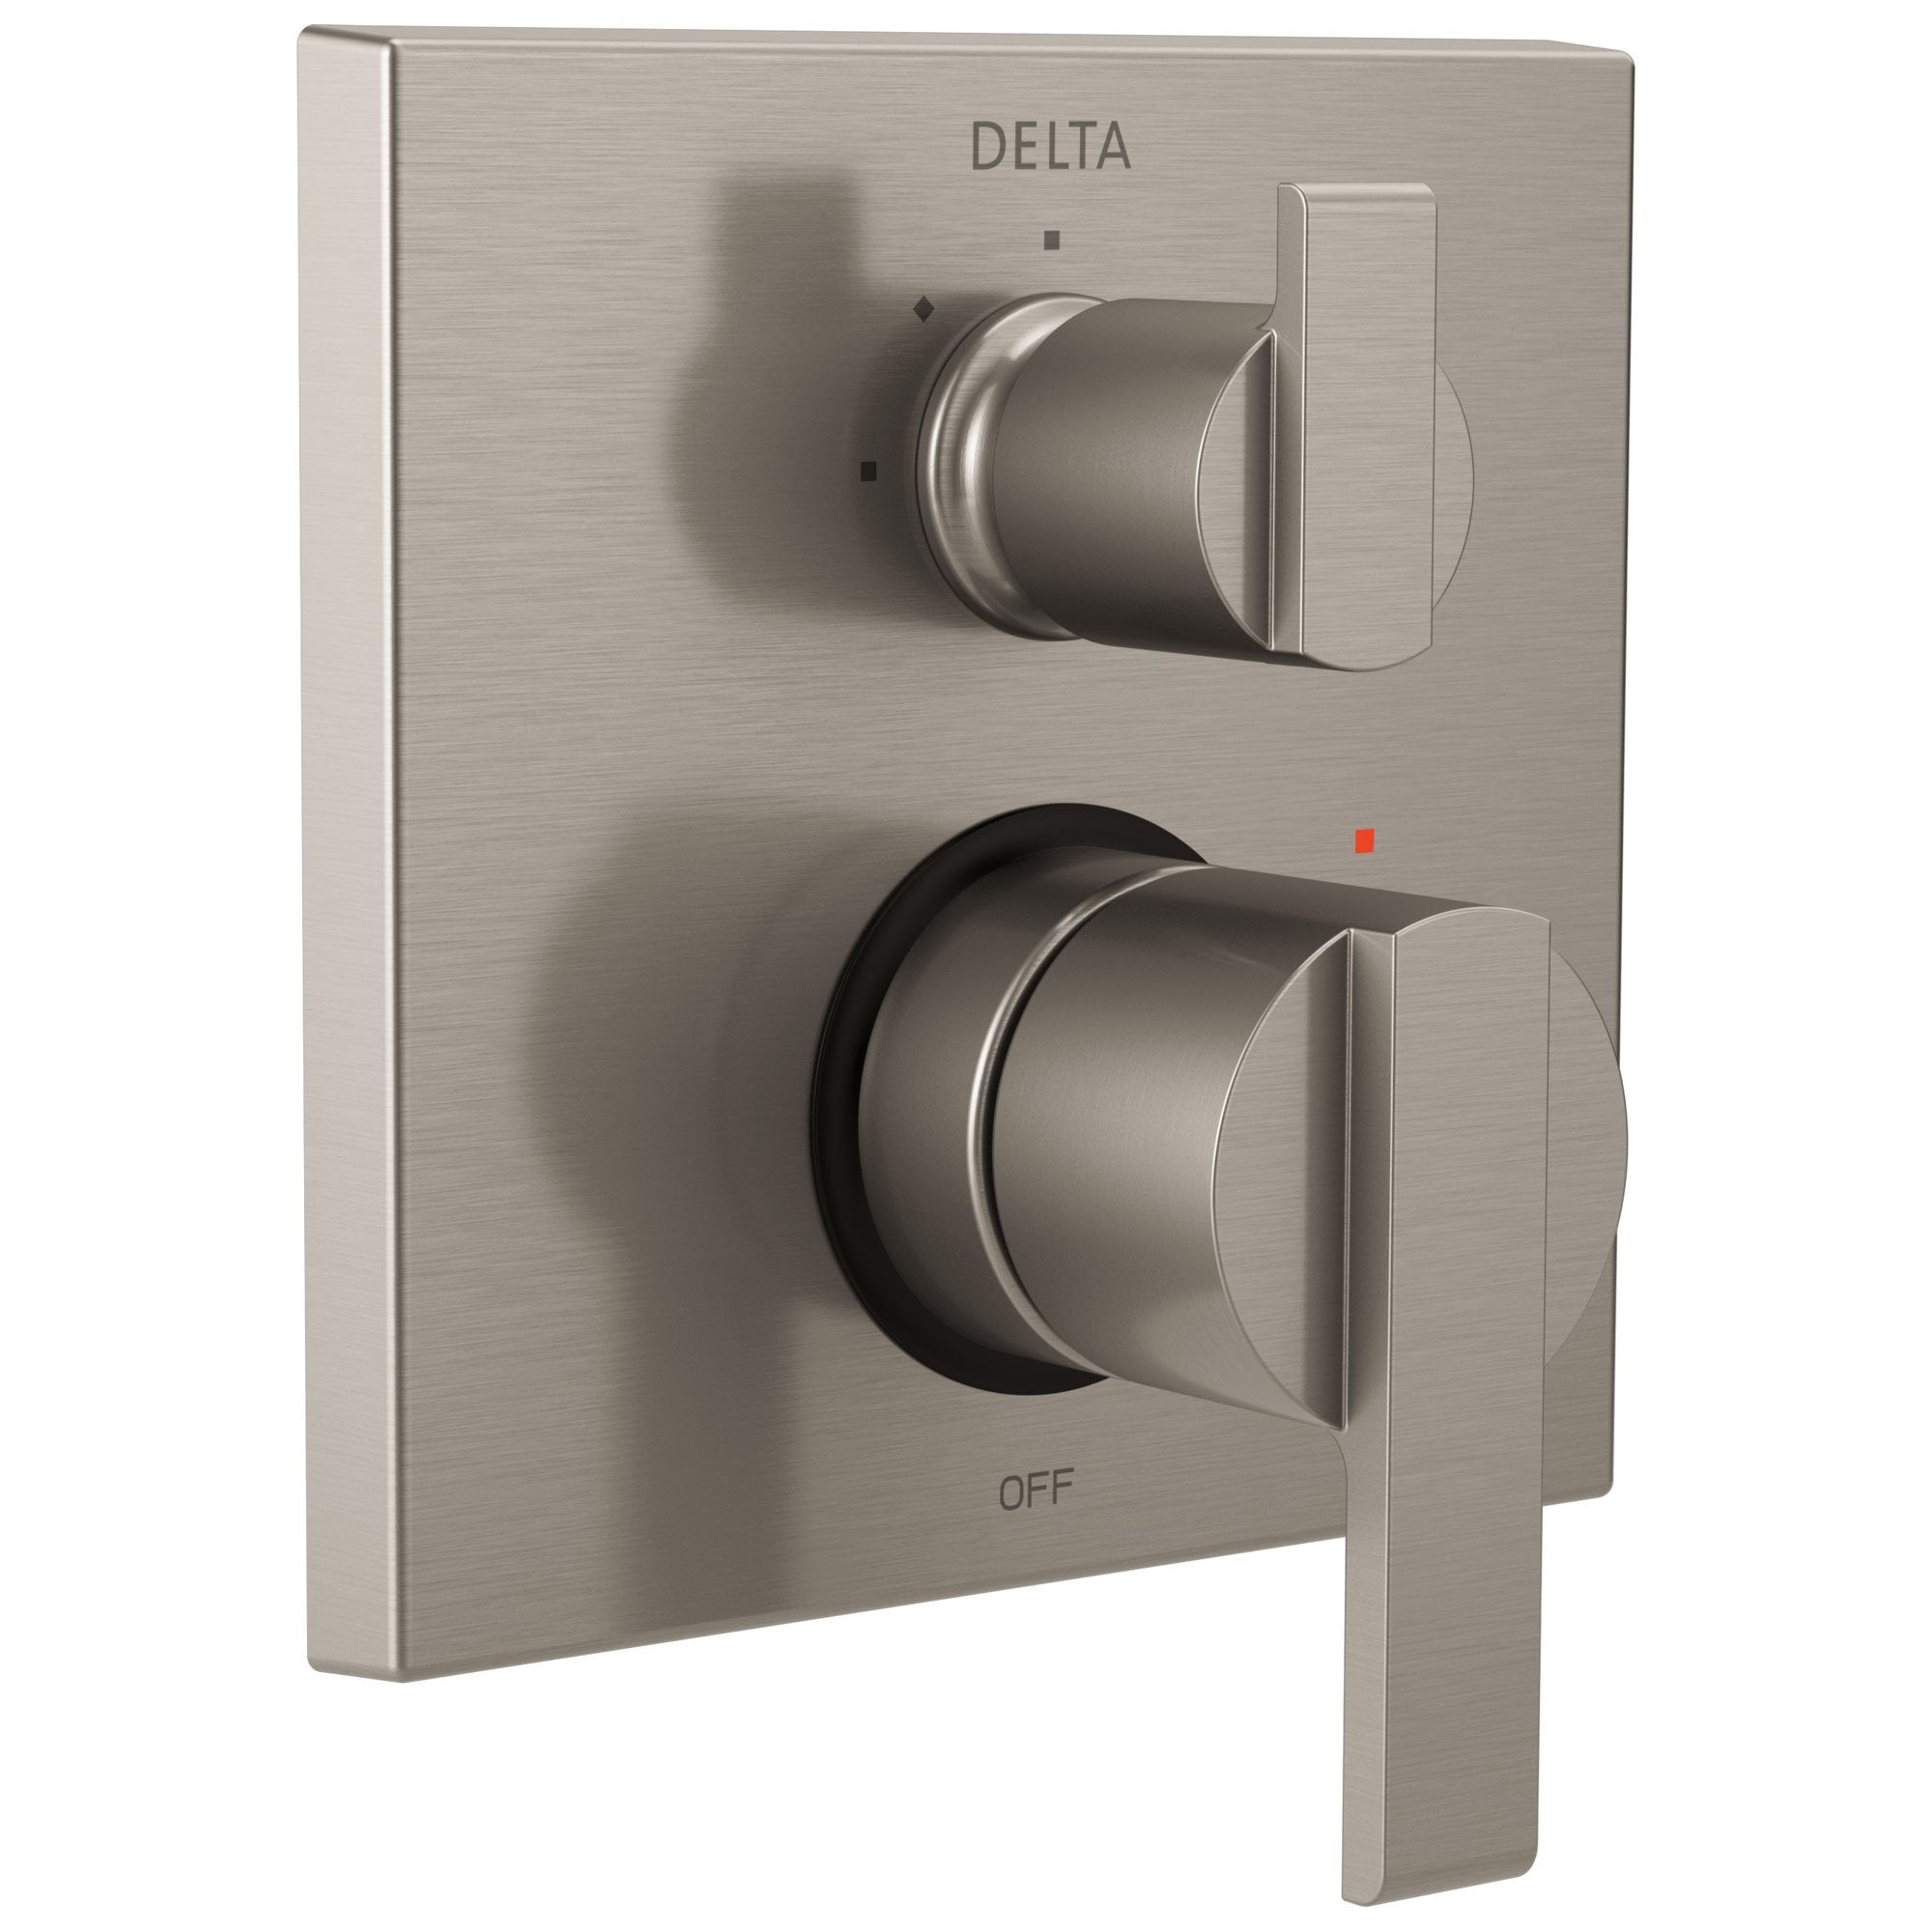 Delta Ara Stainless Steel Finish Shower Faucet Valve Trim Control Handle with 3-Setting Integrated Diverter Includes Trim Kit and Valve with Stops D2209V